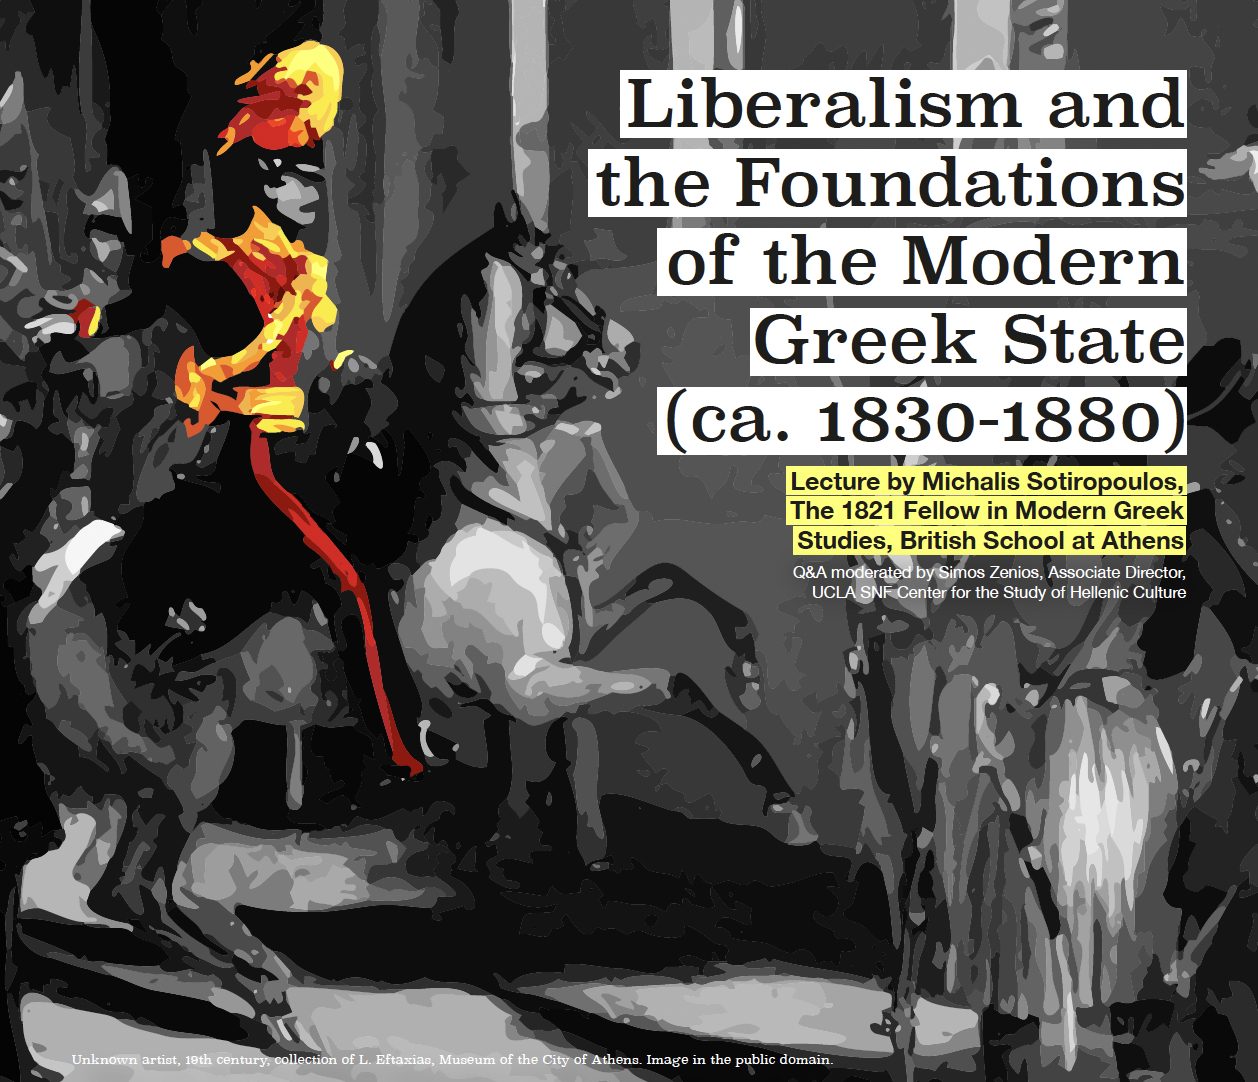 Liberalism and the Foundations of the Modern Greek State Event